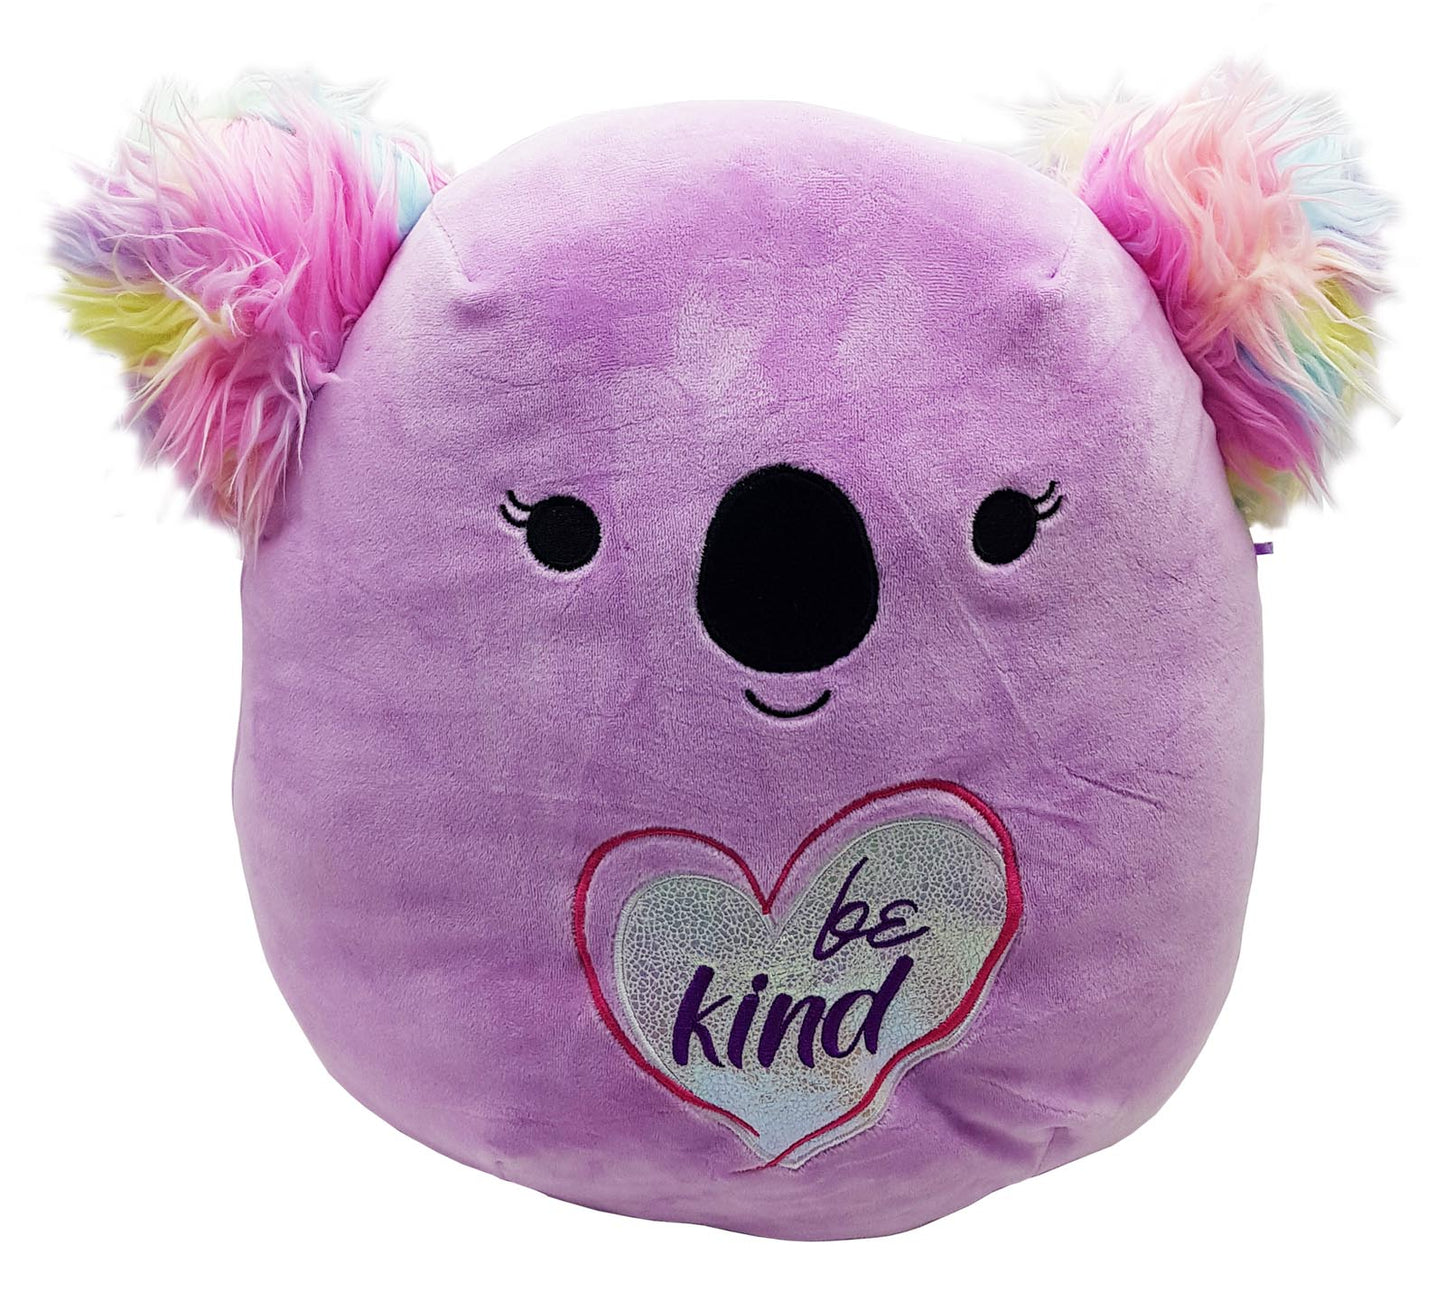 Renate the Koala ~ Be Kind ~ INSPIRATIONAL MESSAGES Squad ~ 12" inch Squishmallow ~ In Stock!